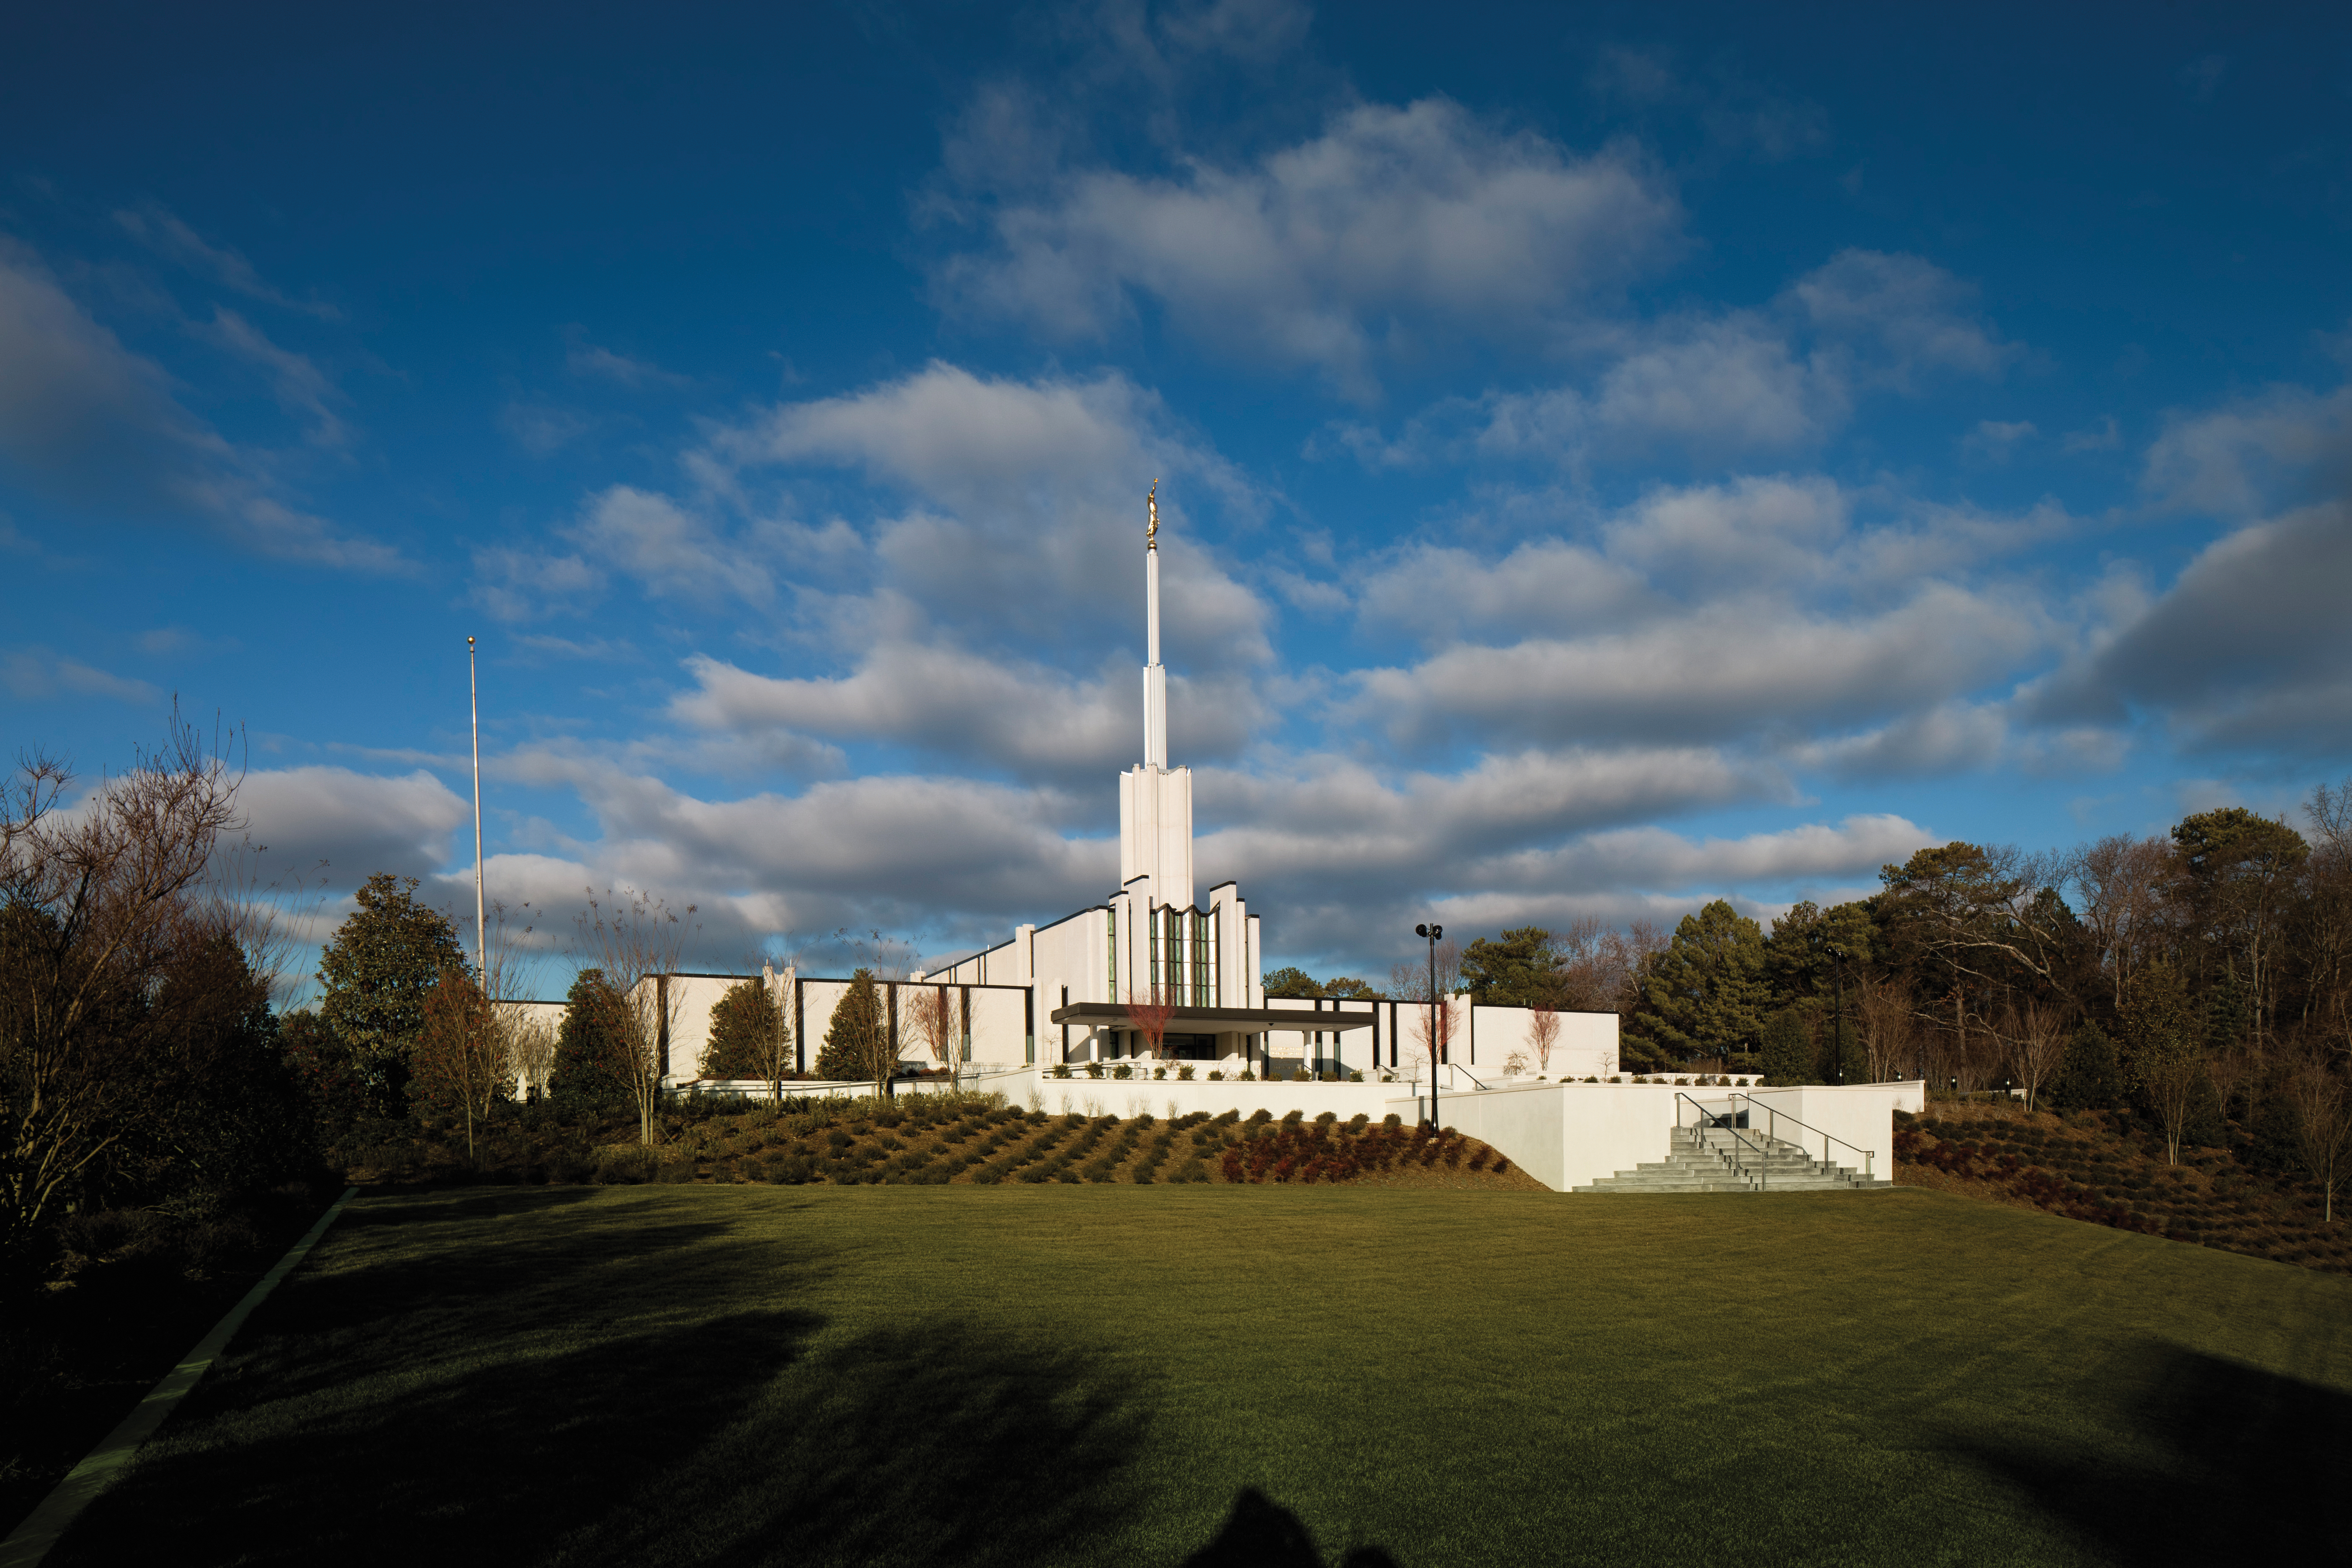 The Atlanta Georgia Temple in the daytime, with a green lawn in the foreground and small gray clouds overhead.